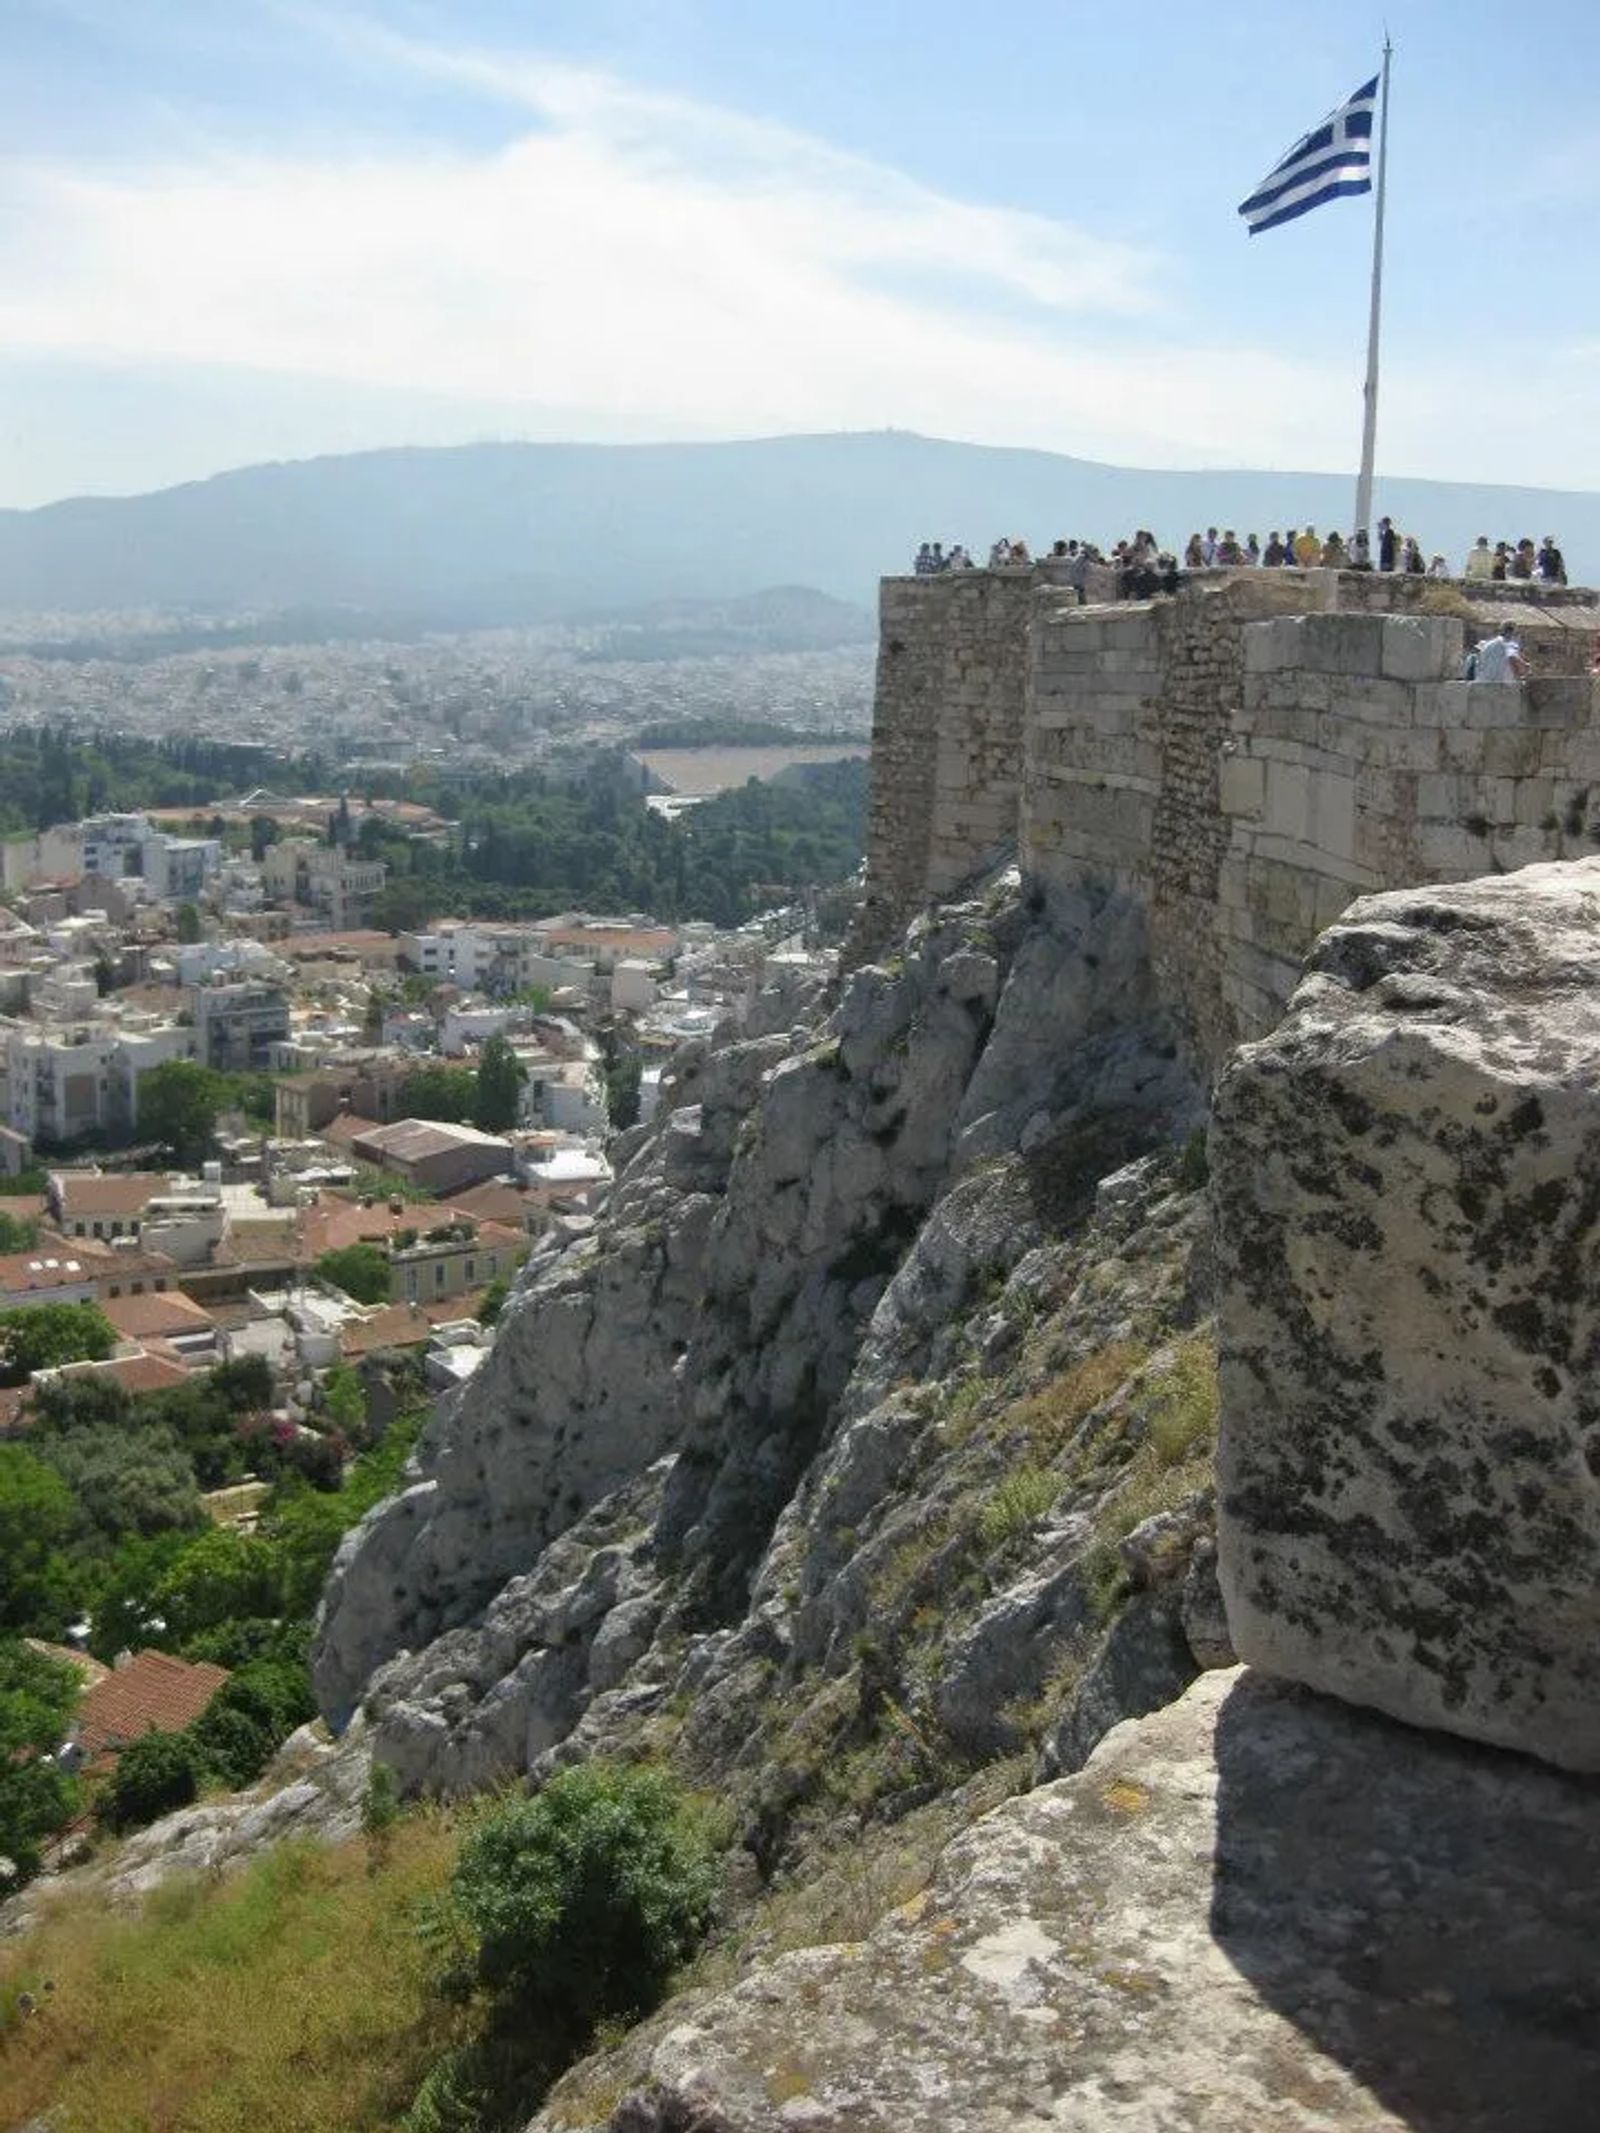 Visiting the Acropolis in Greece - Culture Trekking - #visitingtheacropolis #Greece #HistoryoftheAcropolis